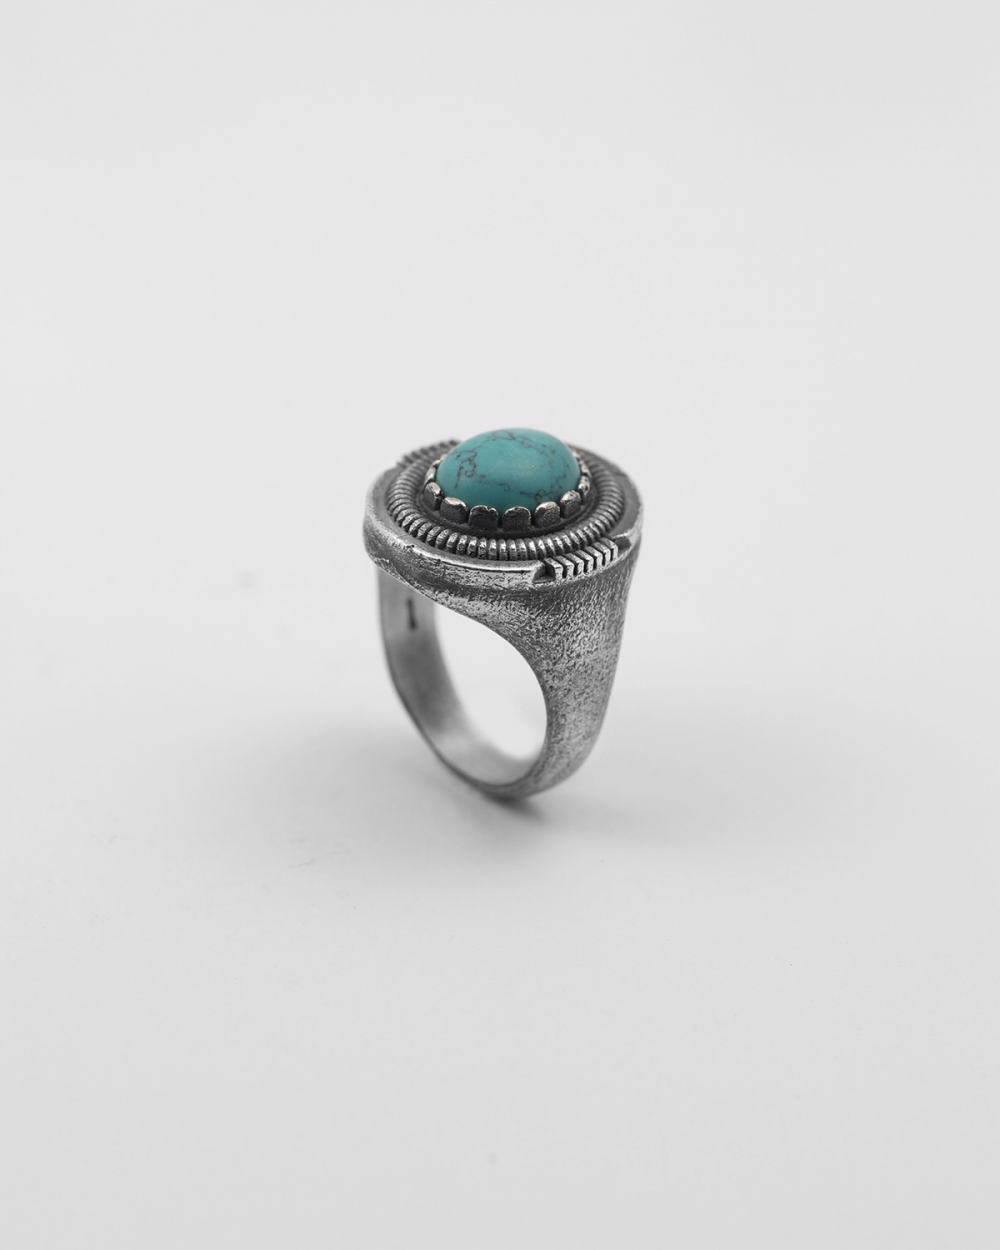 OVAL TURQUOISE SHIELD SIGNET RING